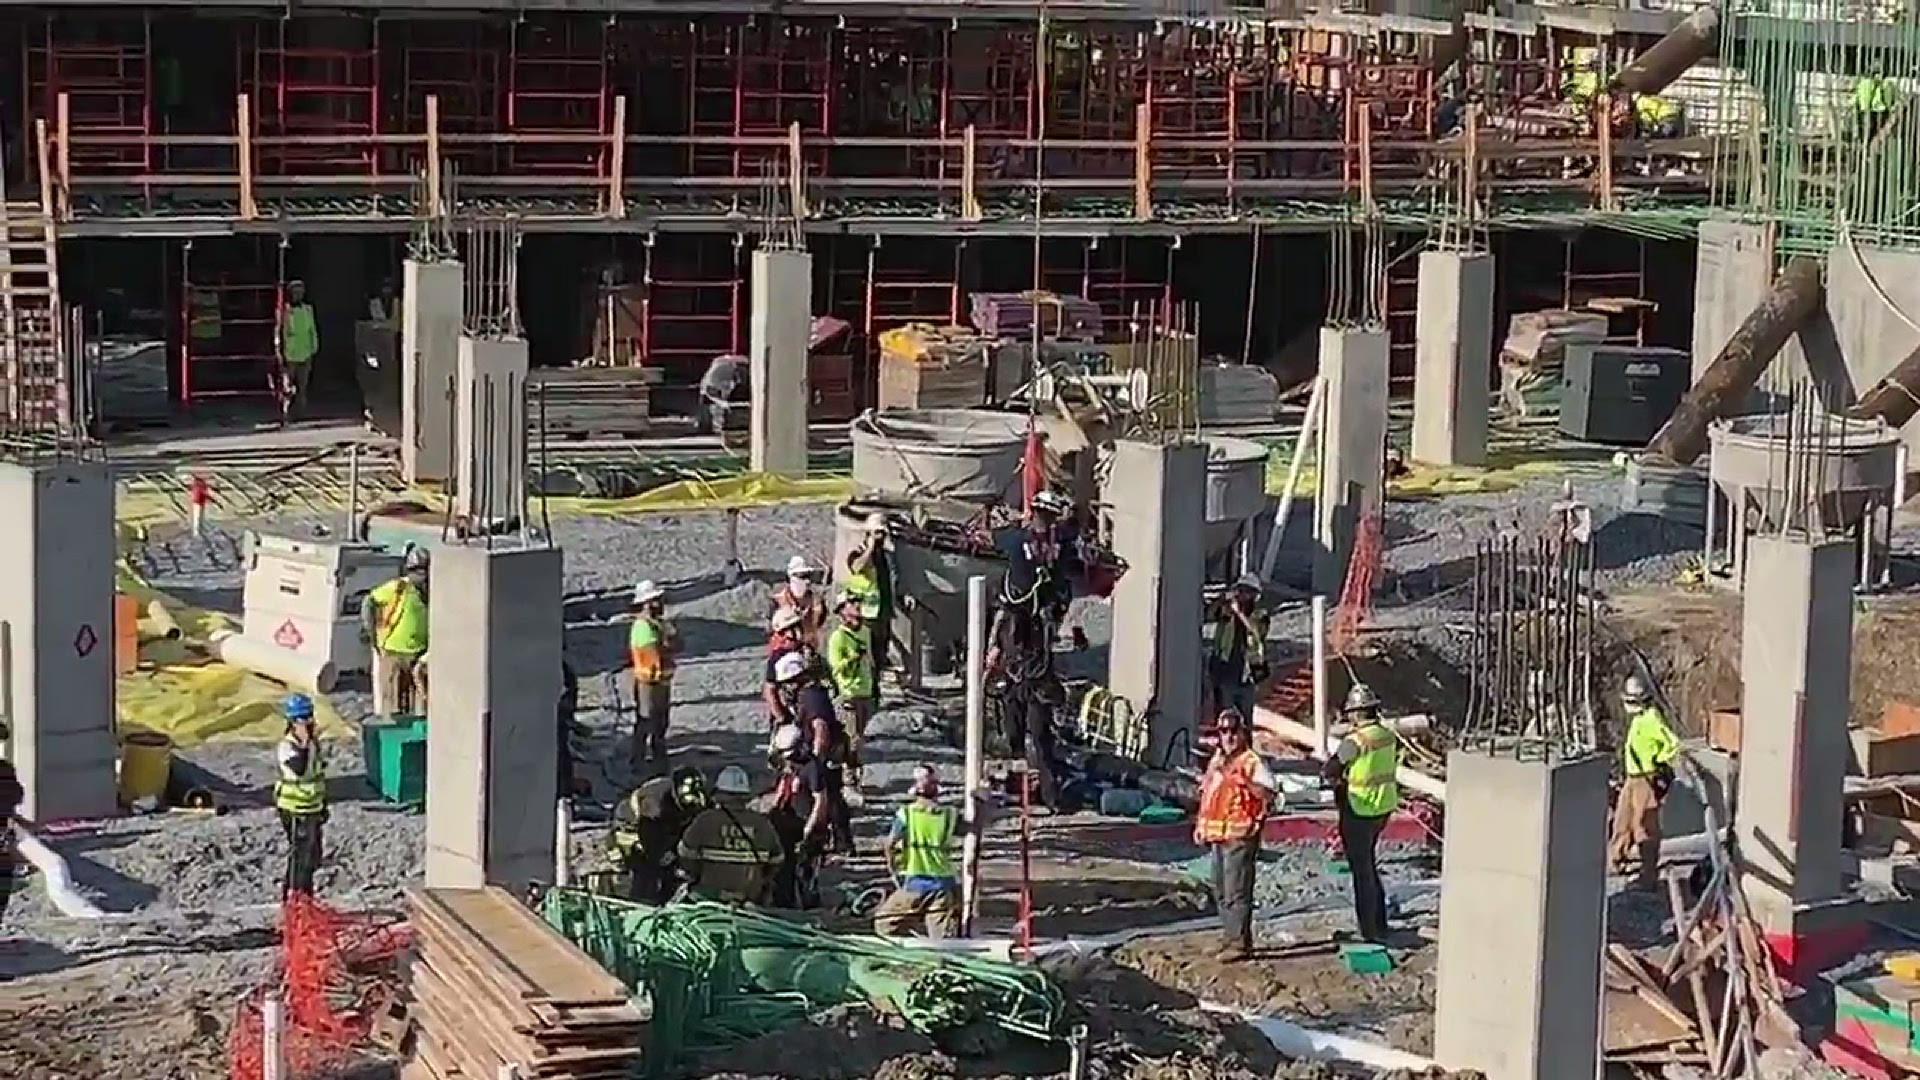 Two construction workers were struck by falling materials at a site on Maine Avenue in DC.